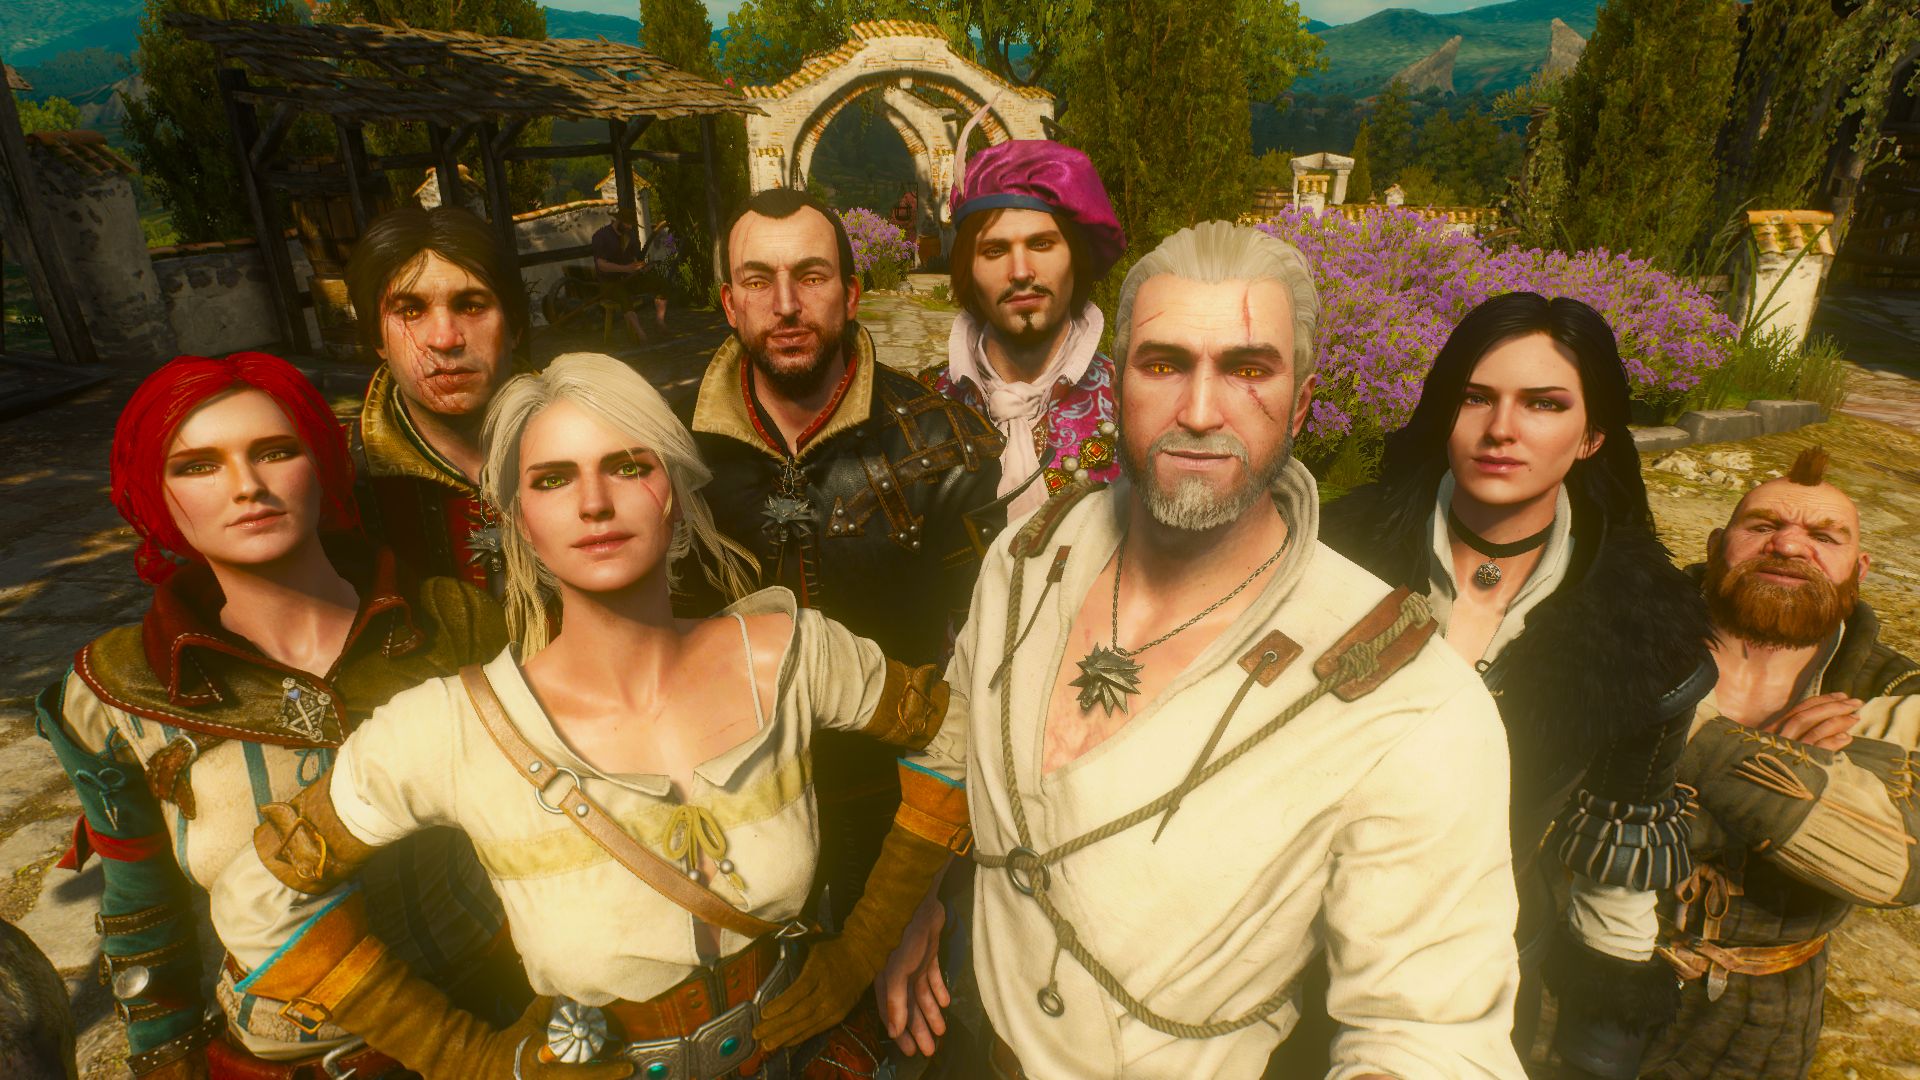 video game, the witcher 3: wild hunt, ciri (the witcher), geralt of rivia, triss merigold, yennefer of vengerberg, the witcher